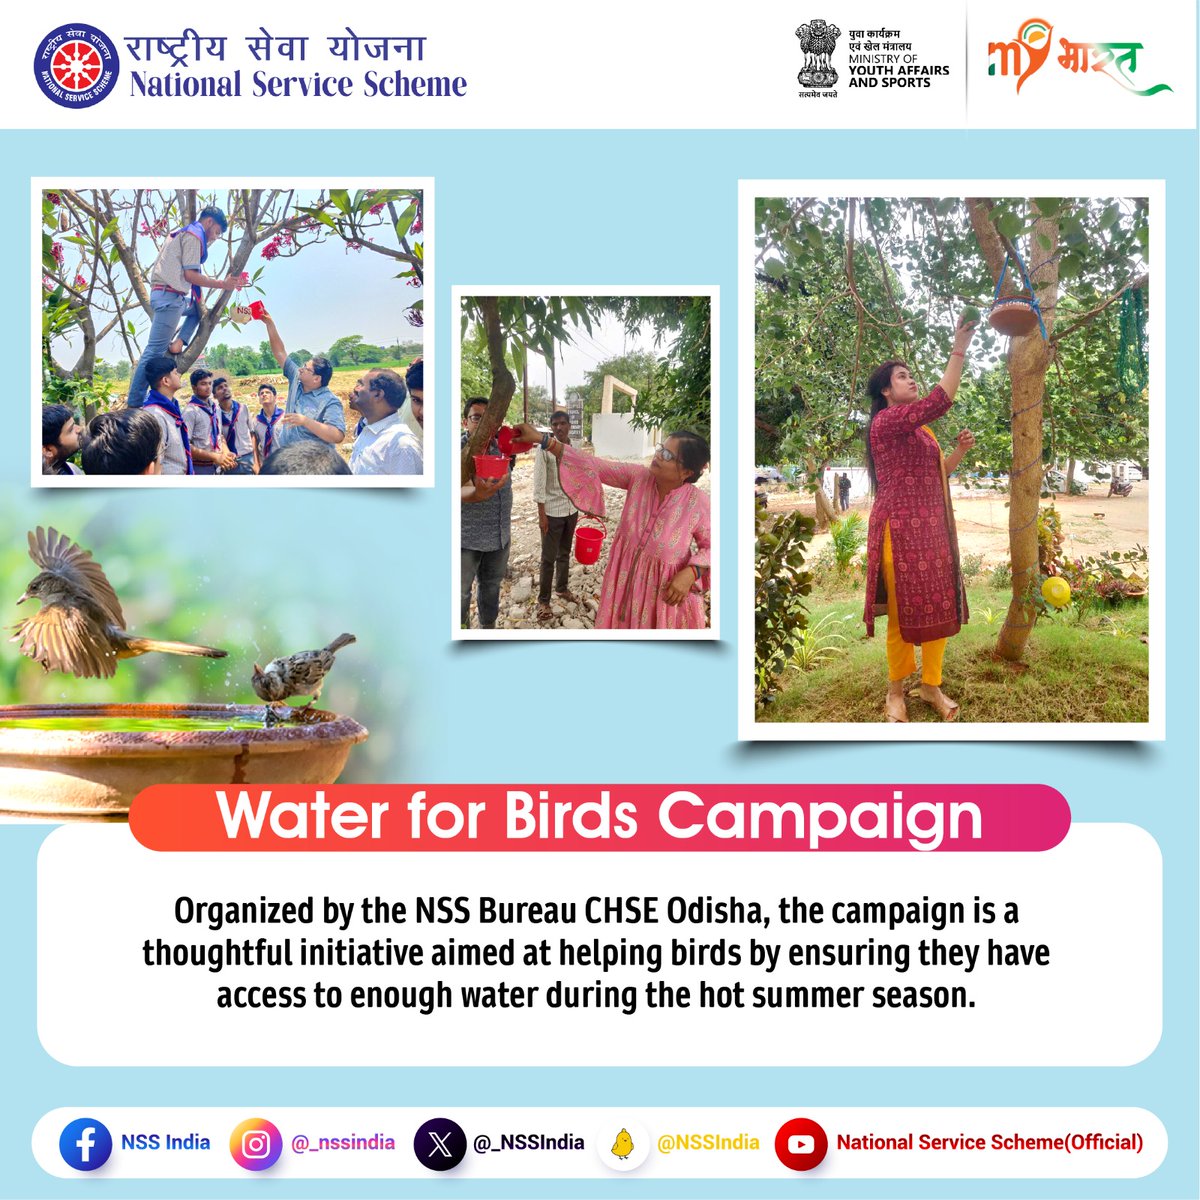 The Water for Birds Campaign by NSS Bureau CHSE Odisha is soaring to new heights. Volunteers are making sure every chirp is heard by providing water bowls amidst the sweltering summer.

#waterforbirds #waterforbirdscampaign